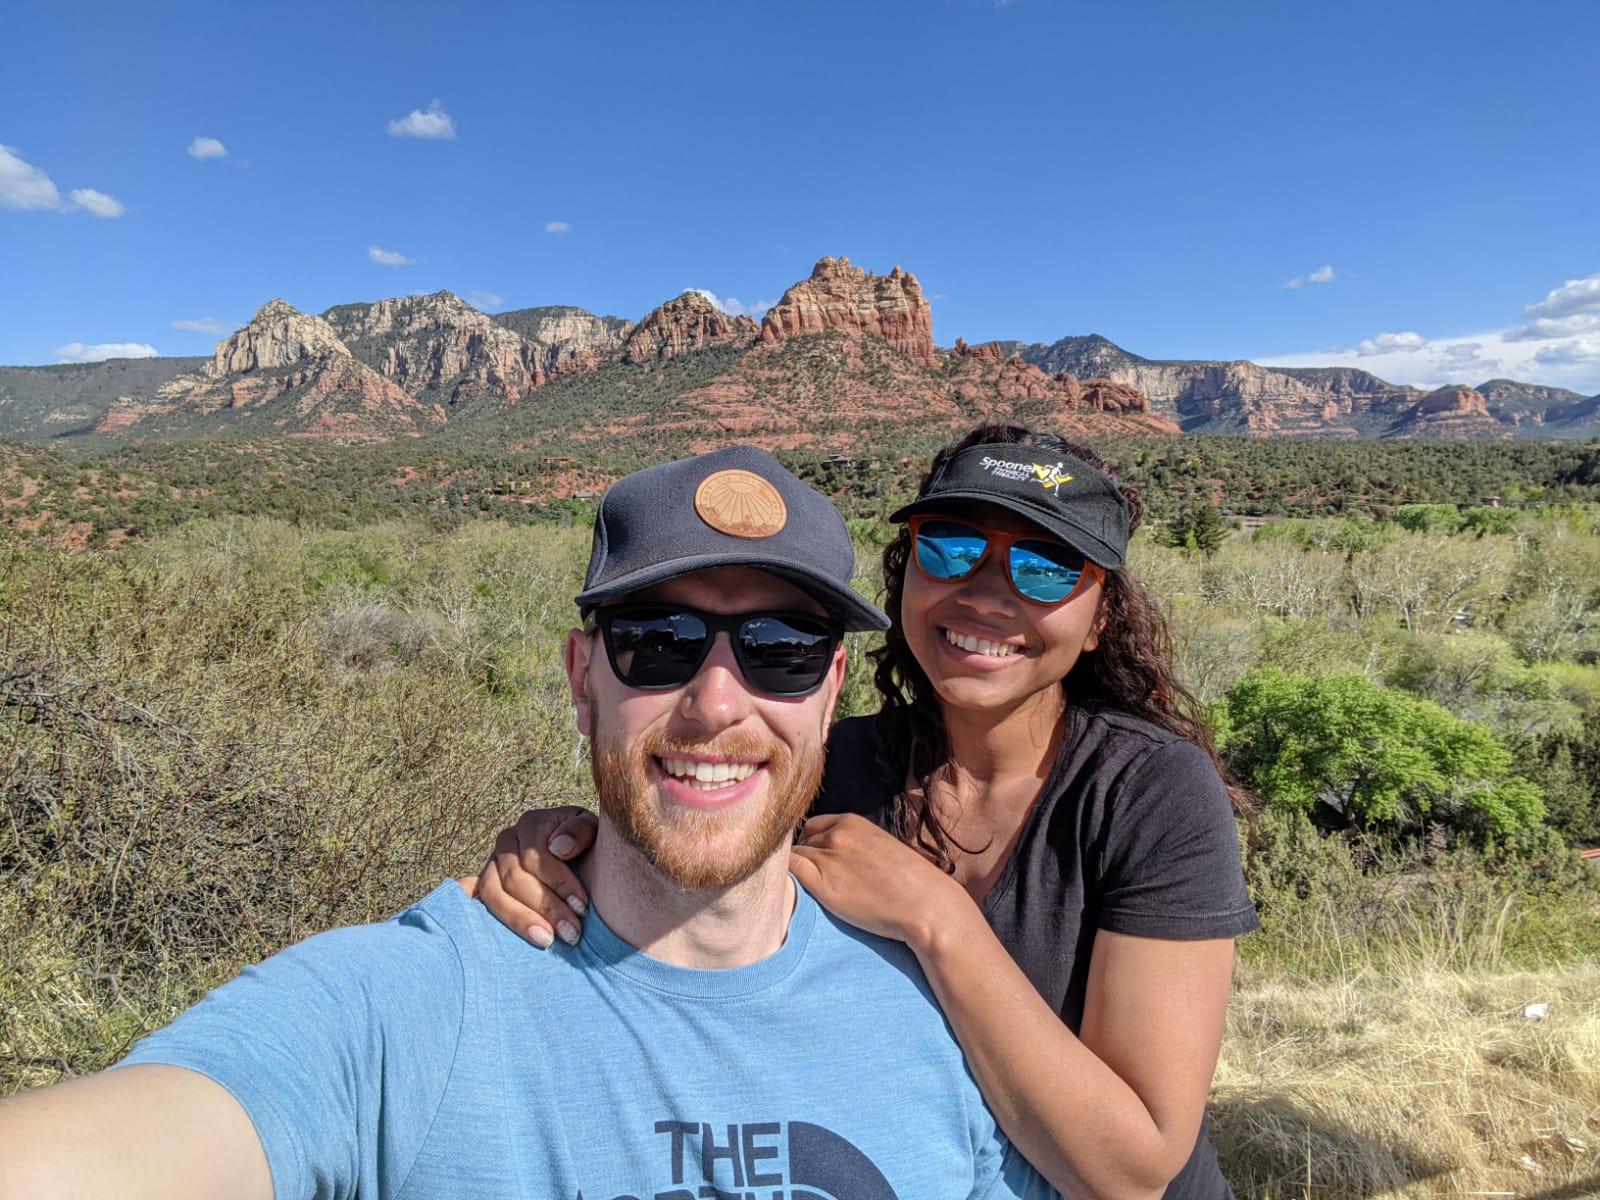 MILEIDIS first time in Sedona, she discovered the beauty of the desert 🏜️